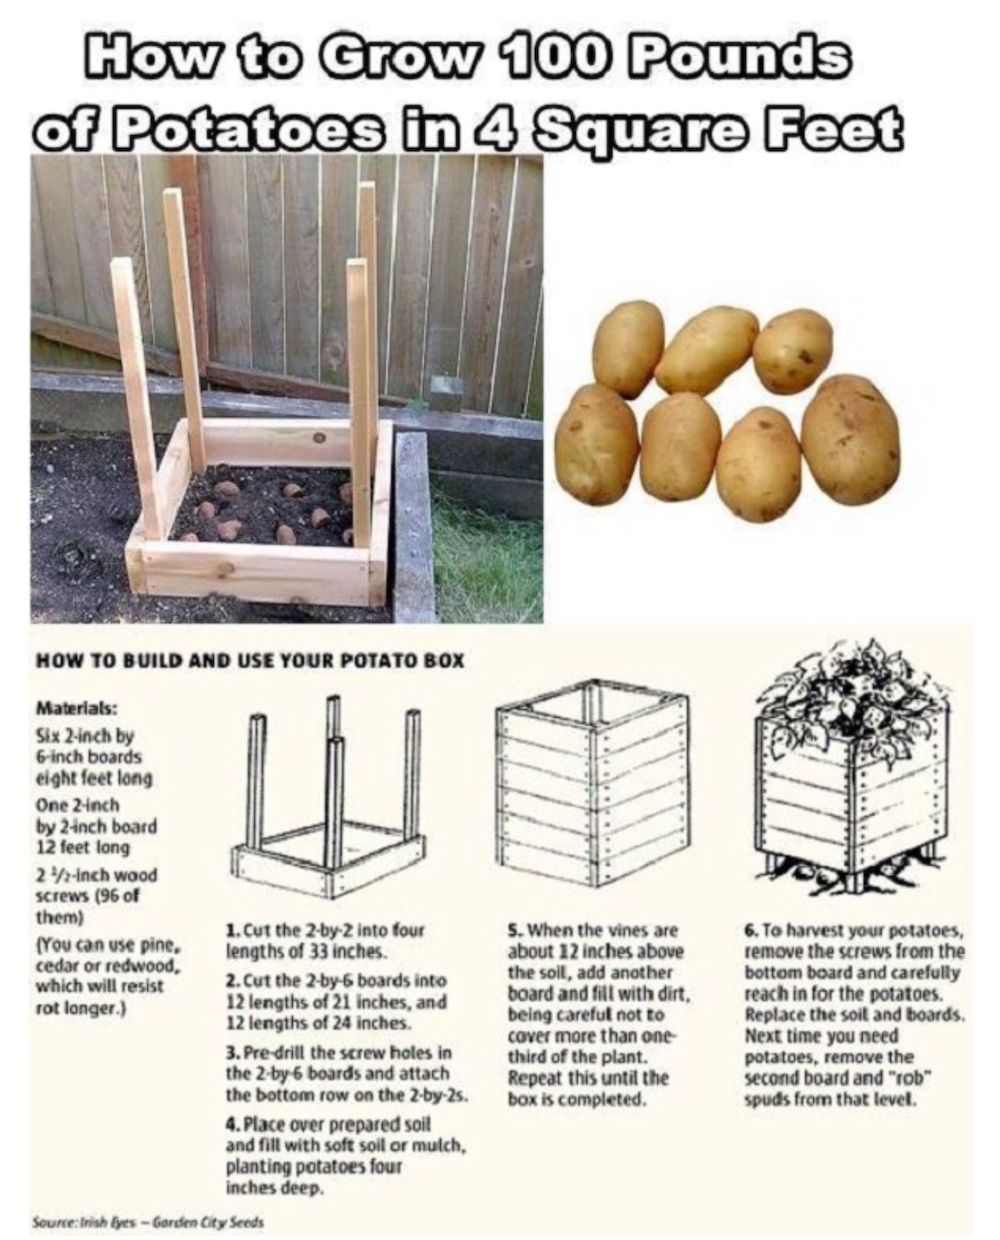 How to make a box for growing potatoes at home.